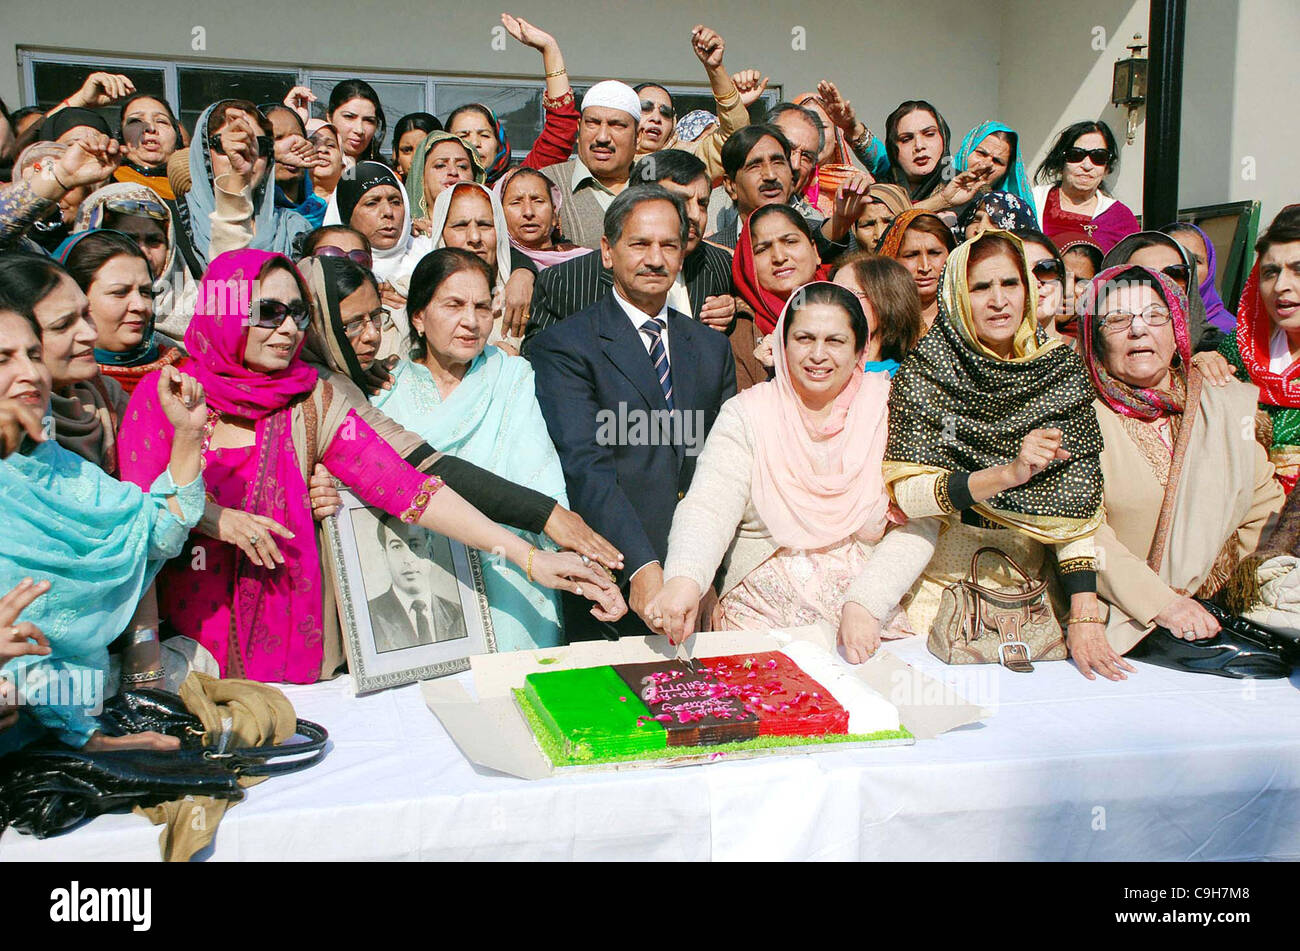 Activists of Peoples Party cut cake during ceremony in connection of the Birthday Anniversary of PPP Founder Zulfiqar Ali Bhutto Stock Photo